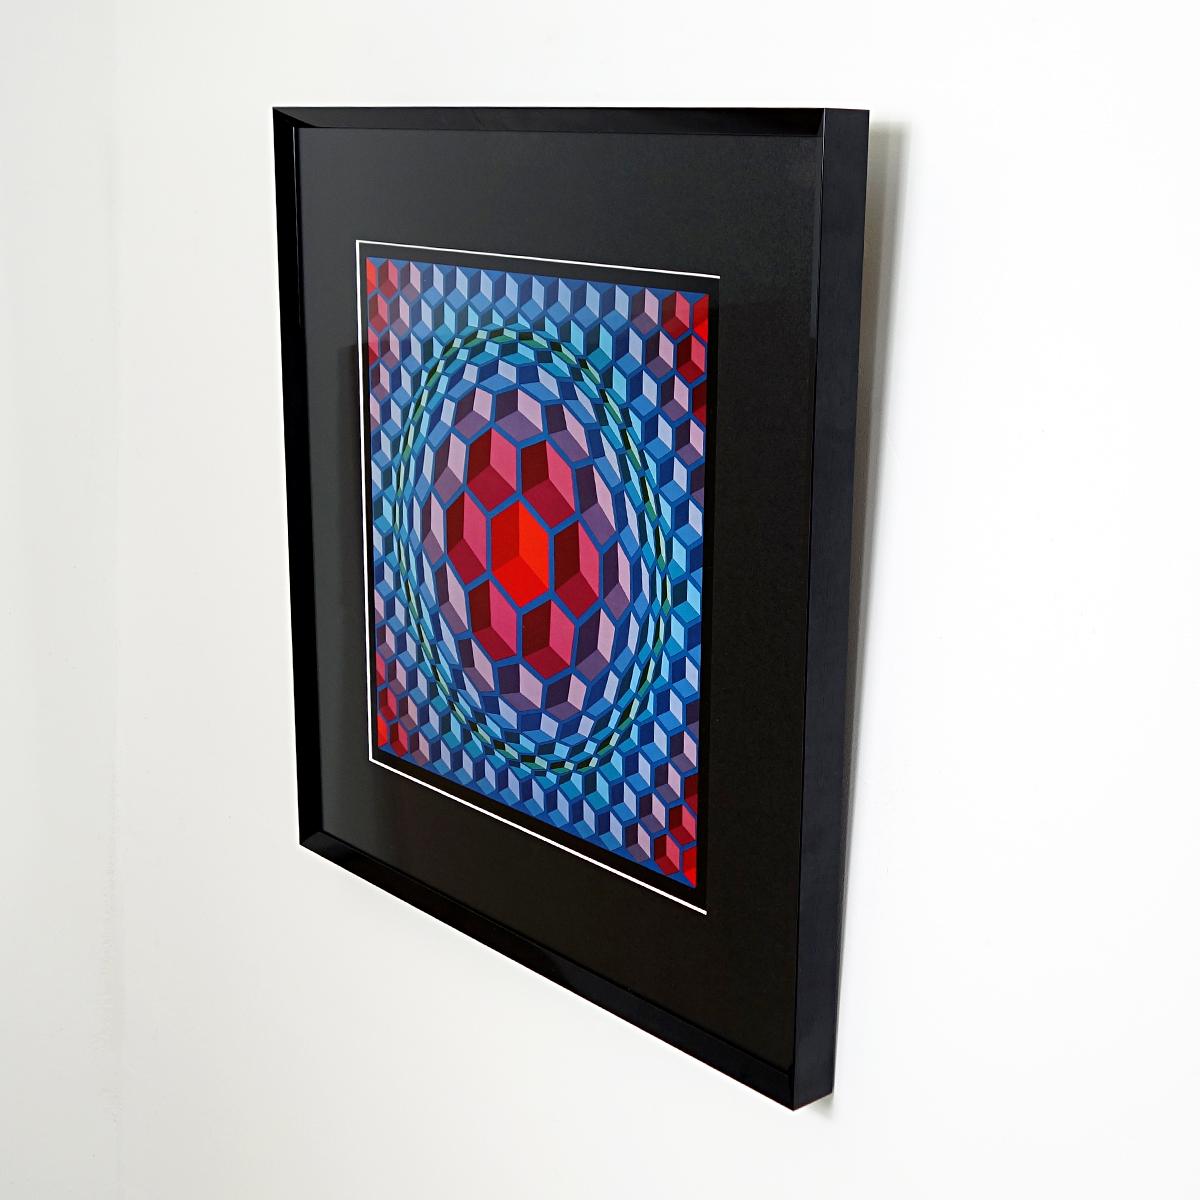 French Op-Art Framed Poster Printed by Editions du Griffon, 1972 For Sale